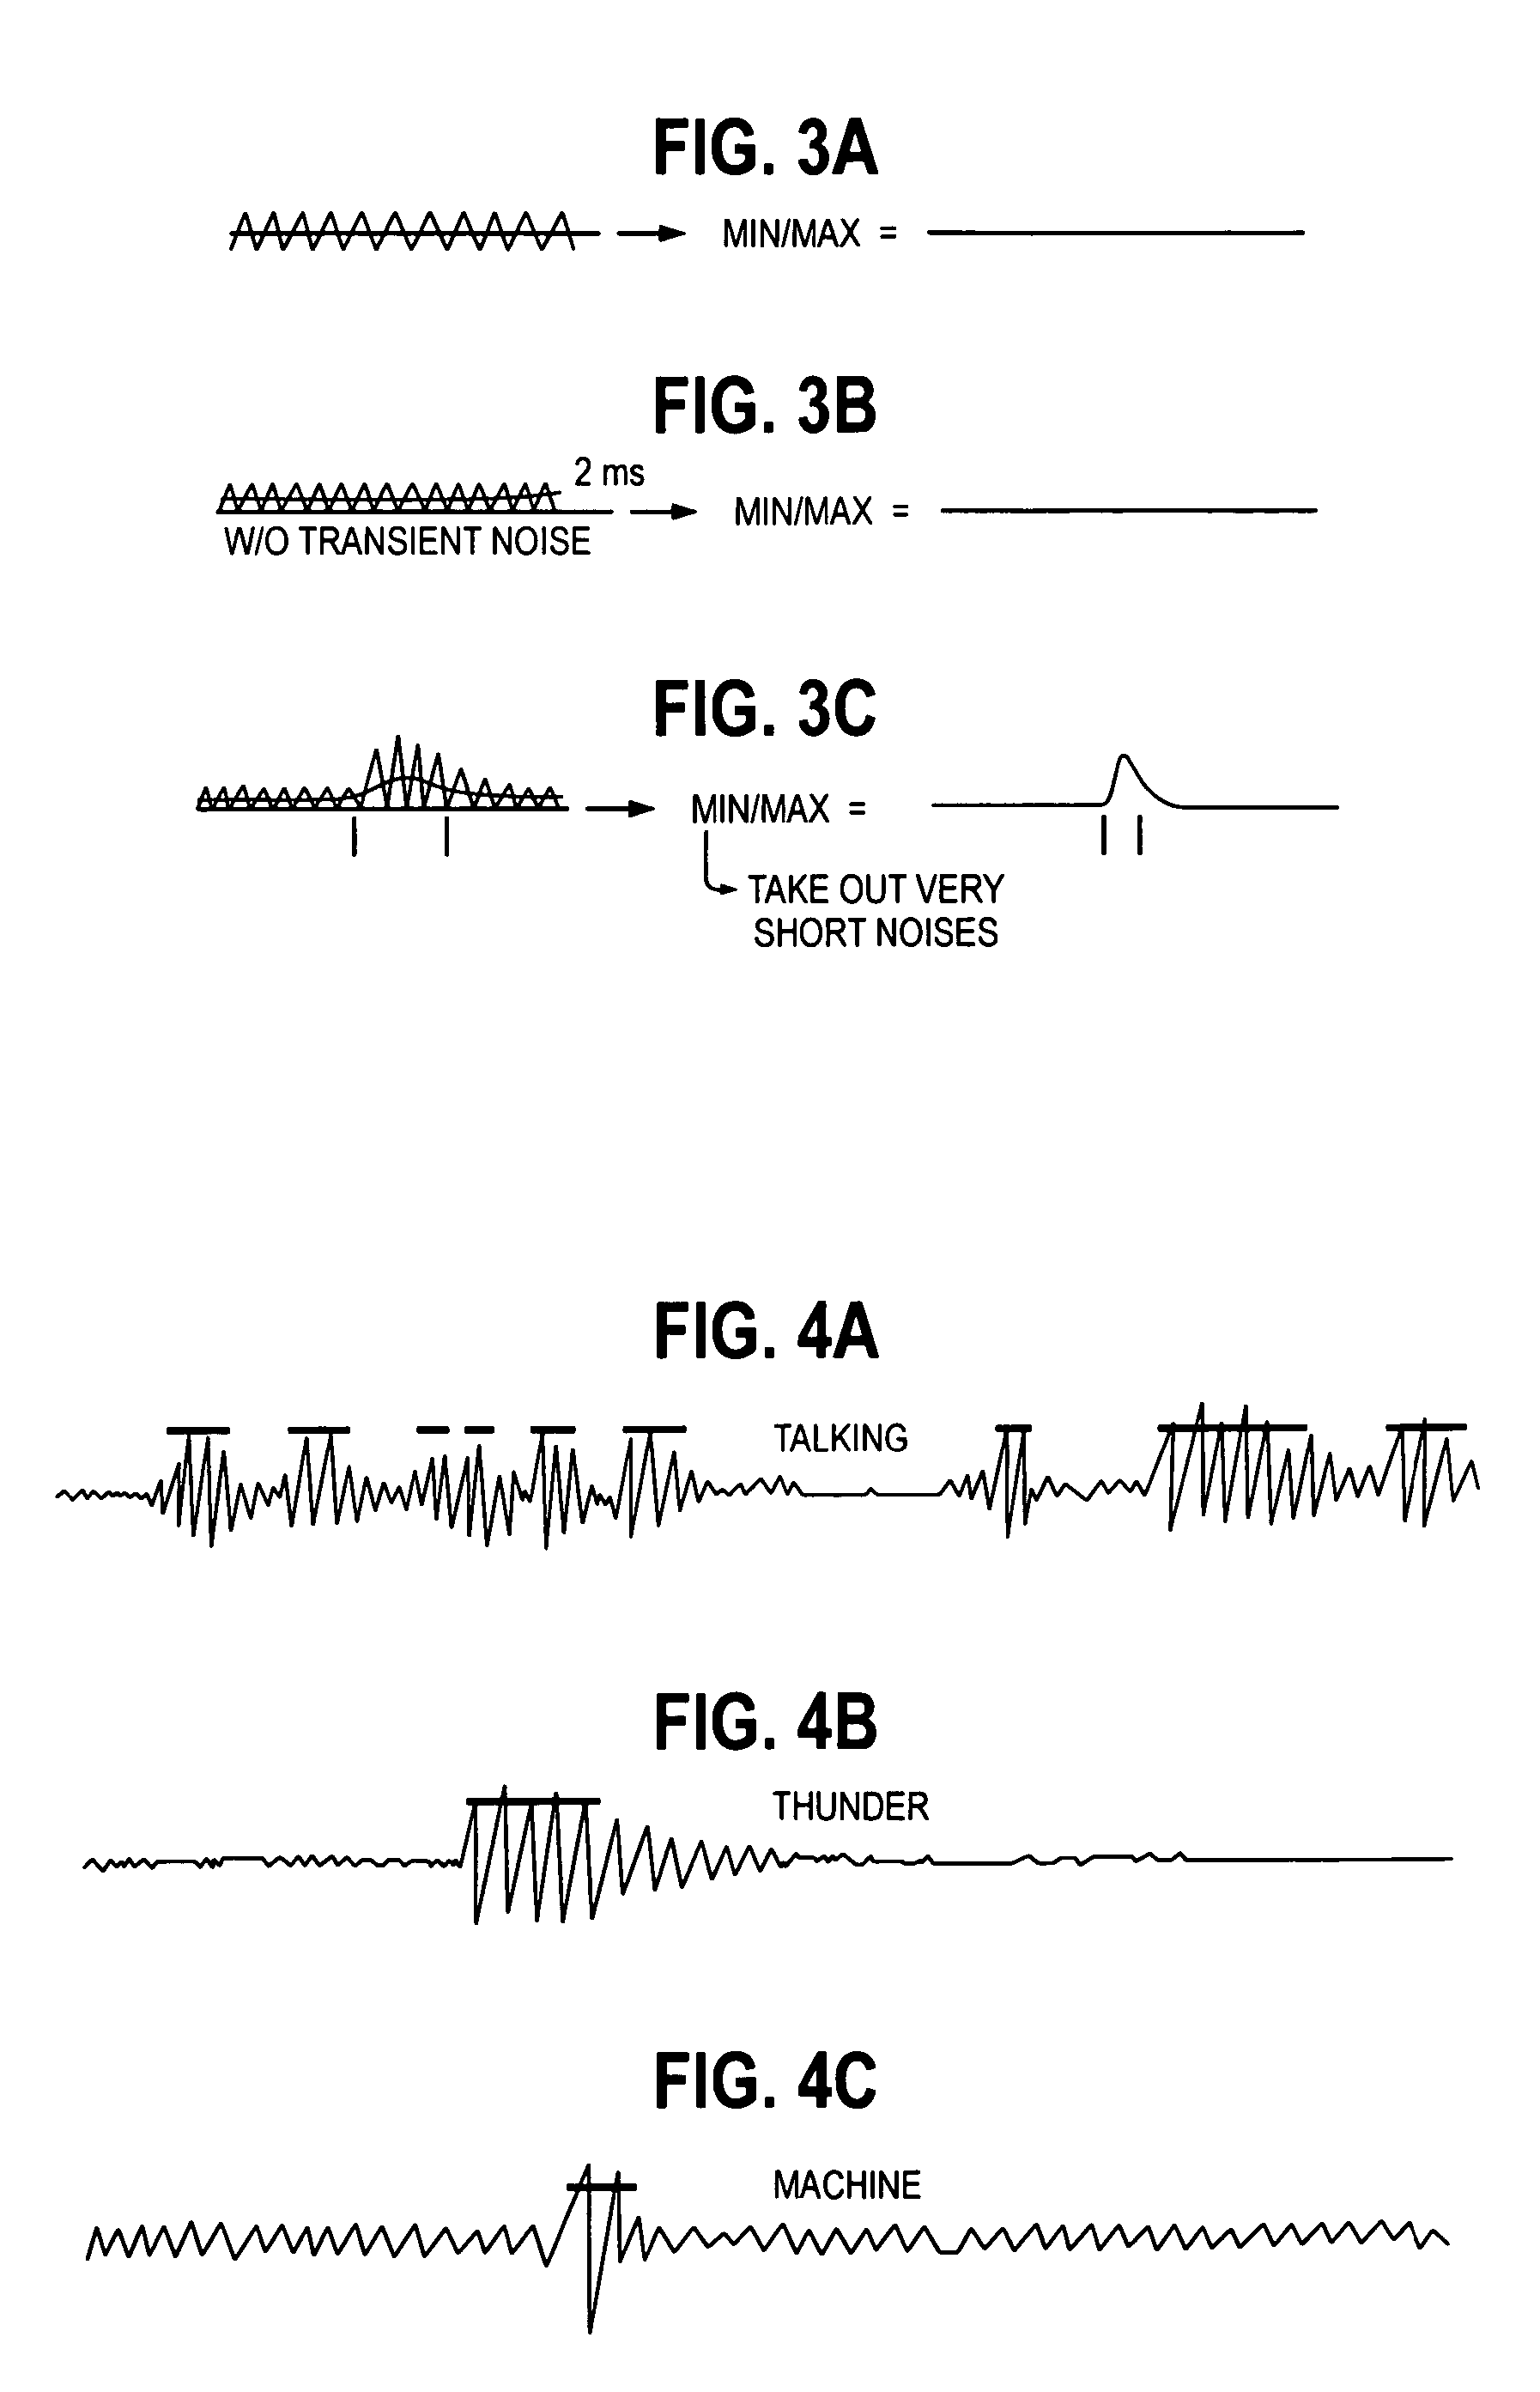 Multi-sensor fire detectors with audio sensors and systems thereof